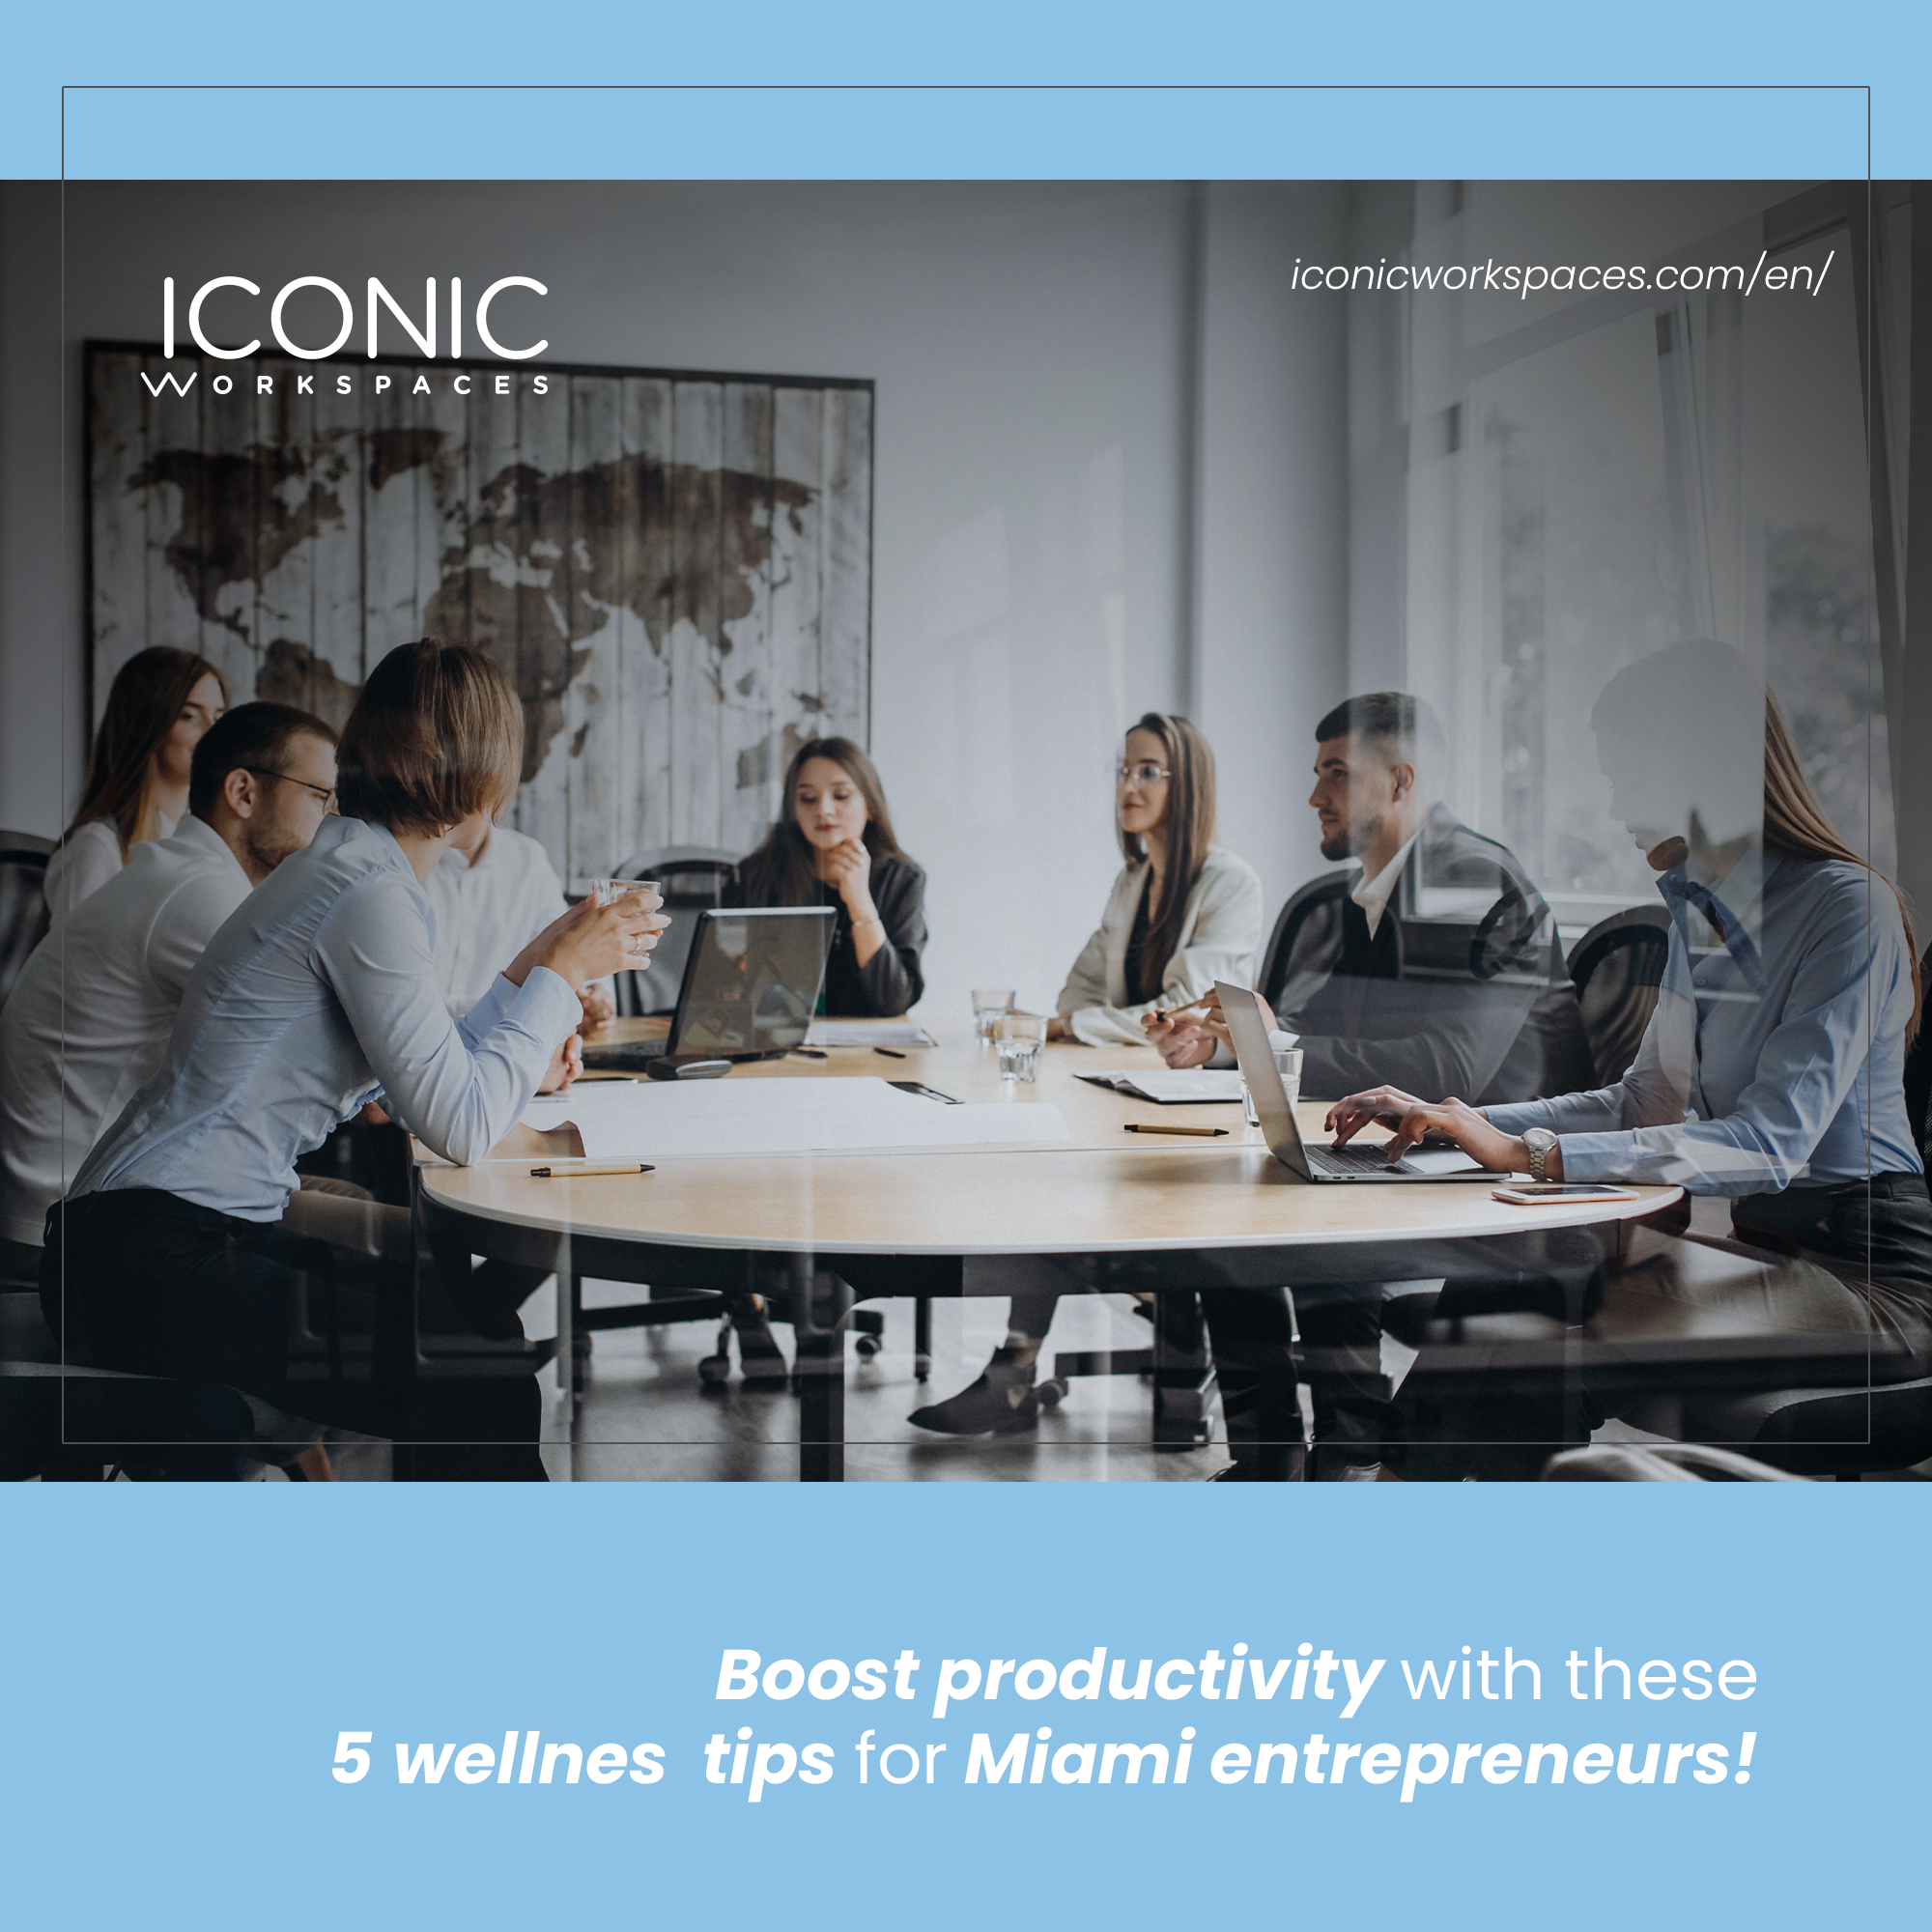 Boost Productivity With These 5 Wellness Tips for Miami Entrepreneurs